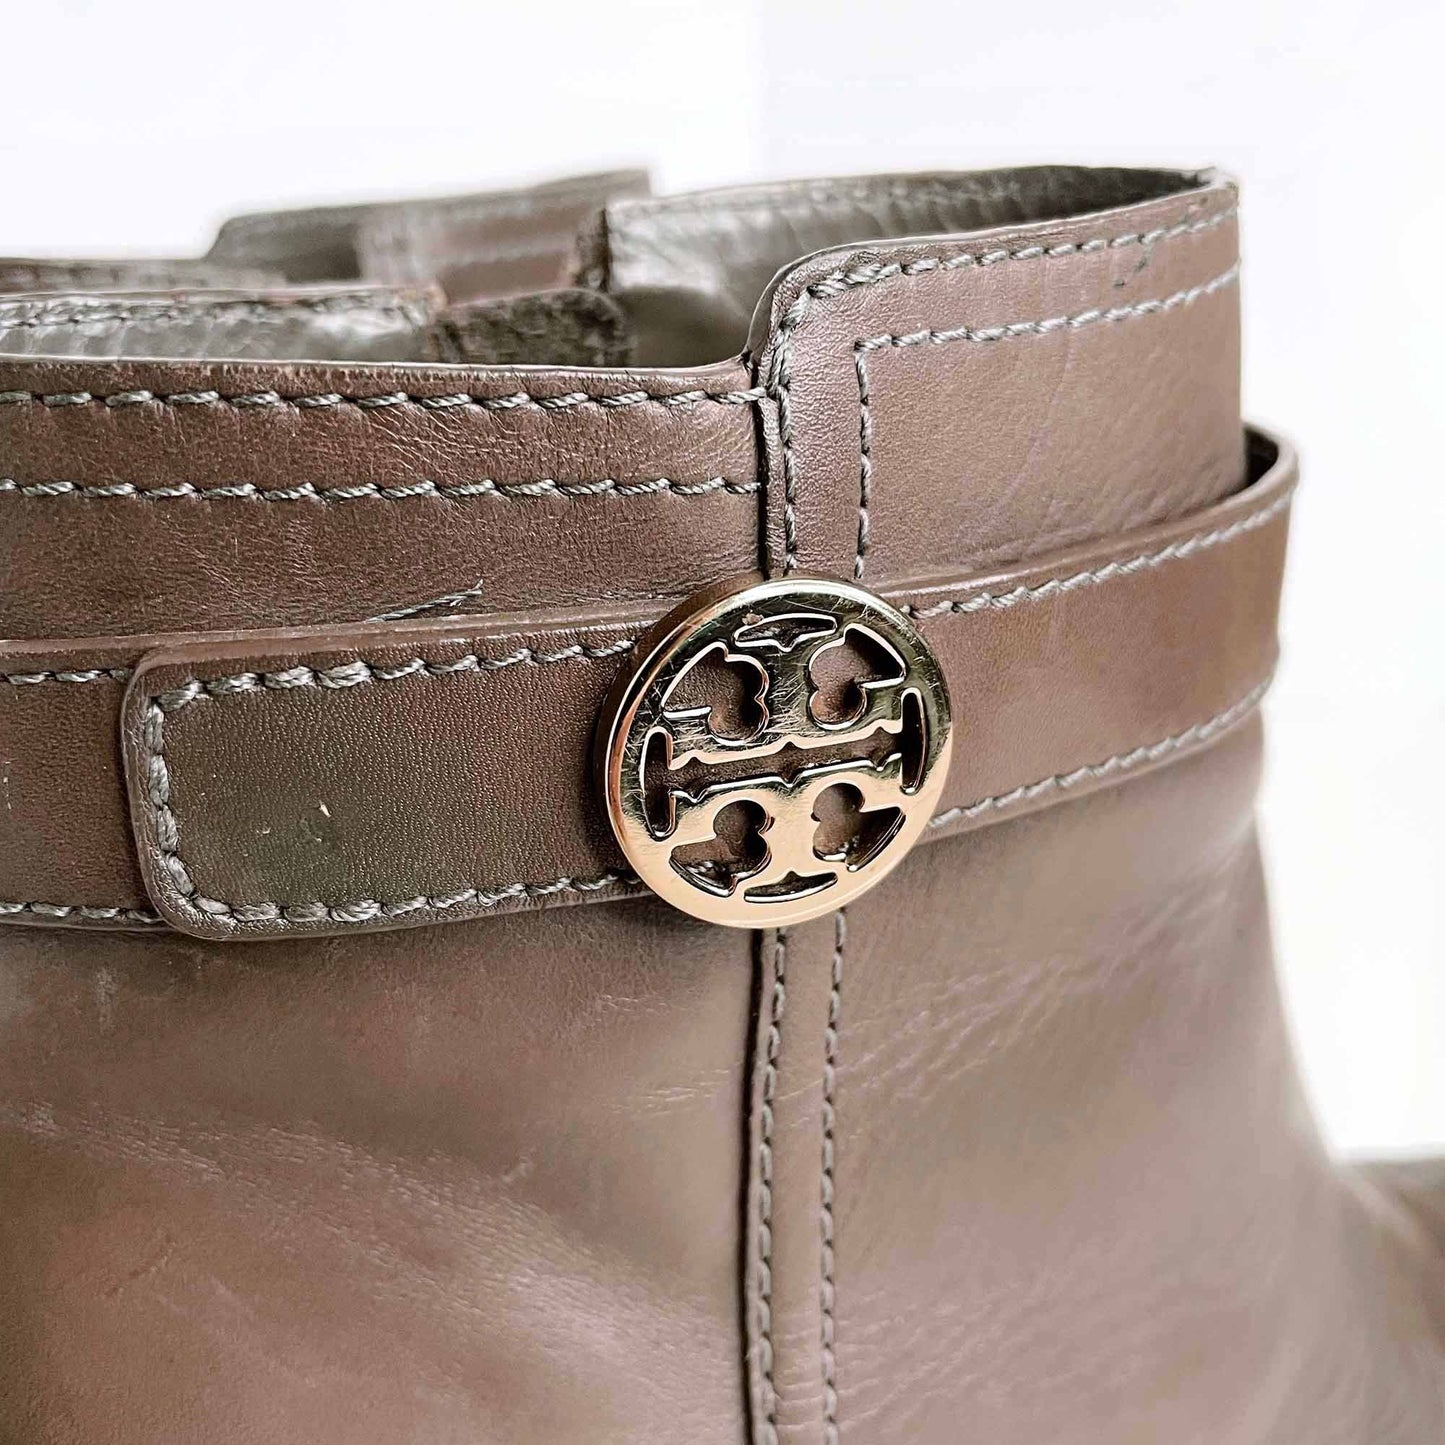 tory burch leather bristol booties in elephant brown - size 8